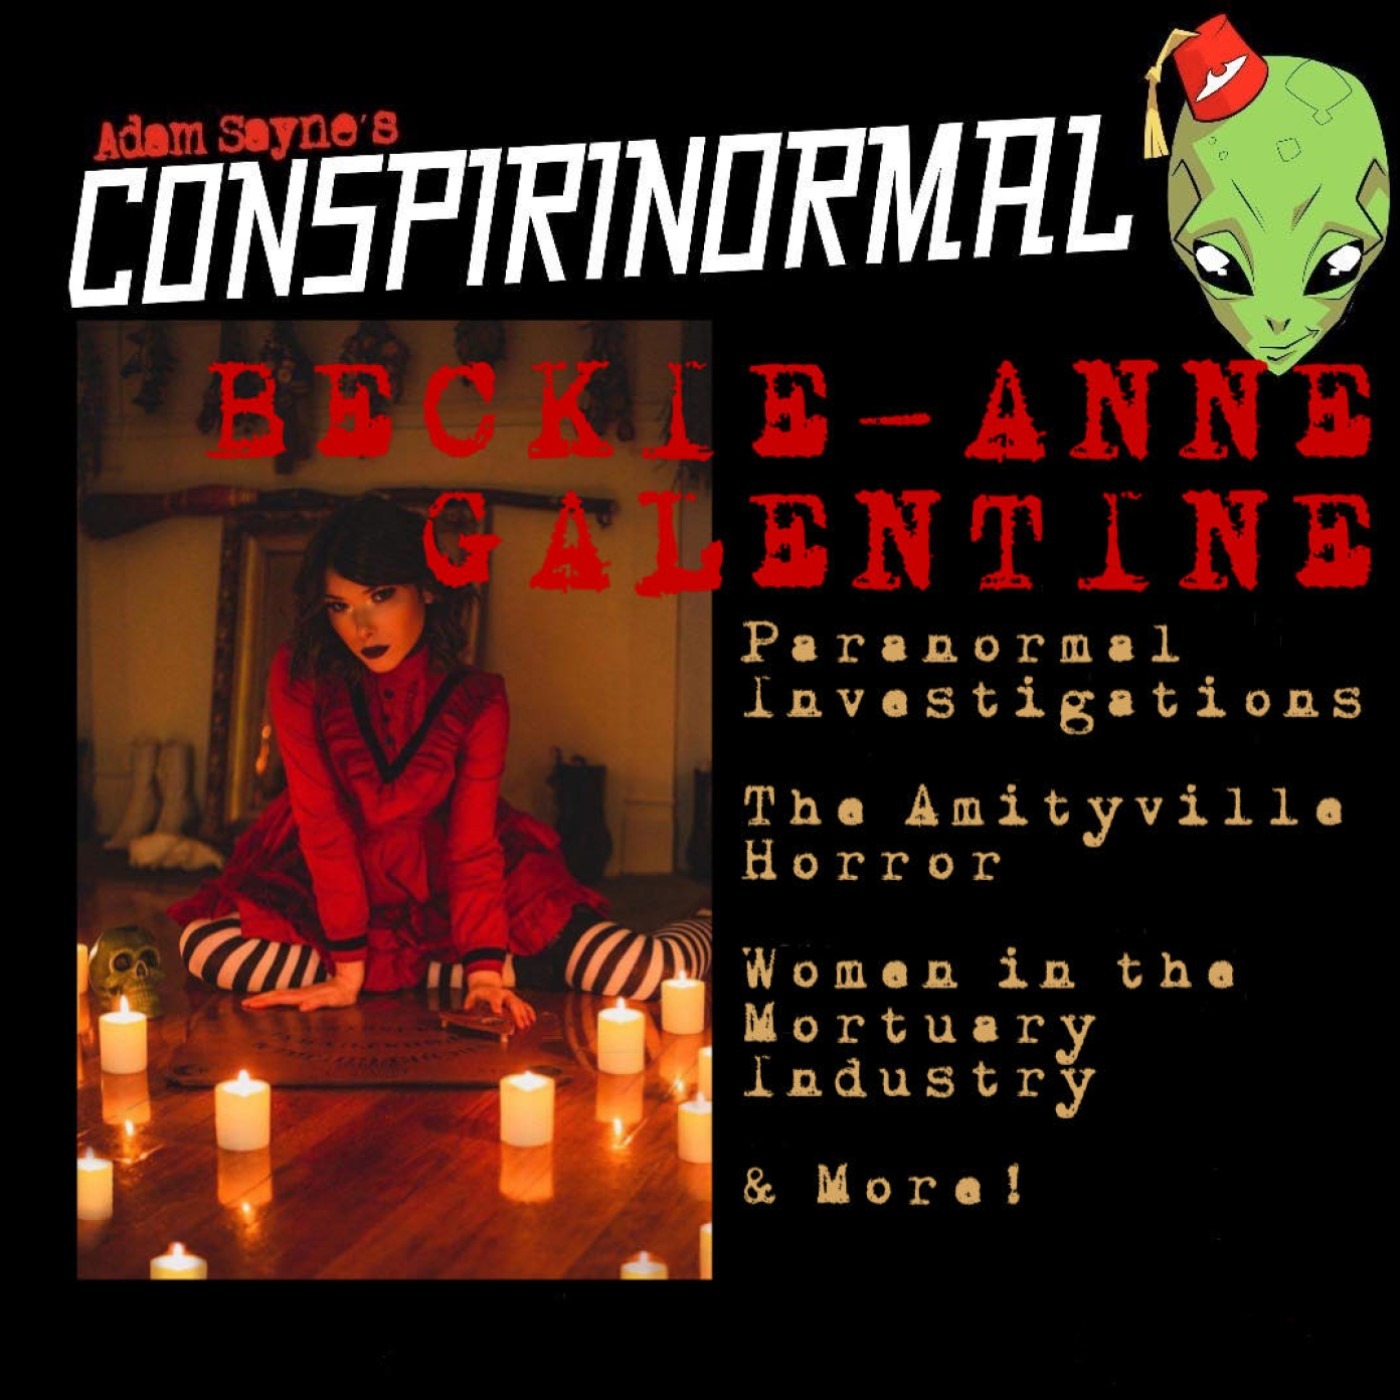 Conspirinormal 444- Beckie-Ann Galentine (Paranormal Investigating, Amityville, and Morticians)